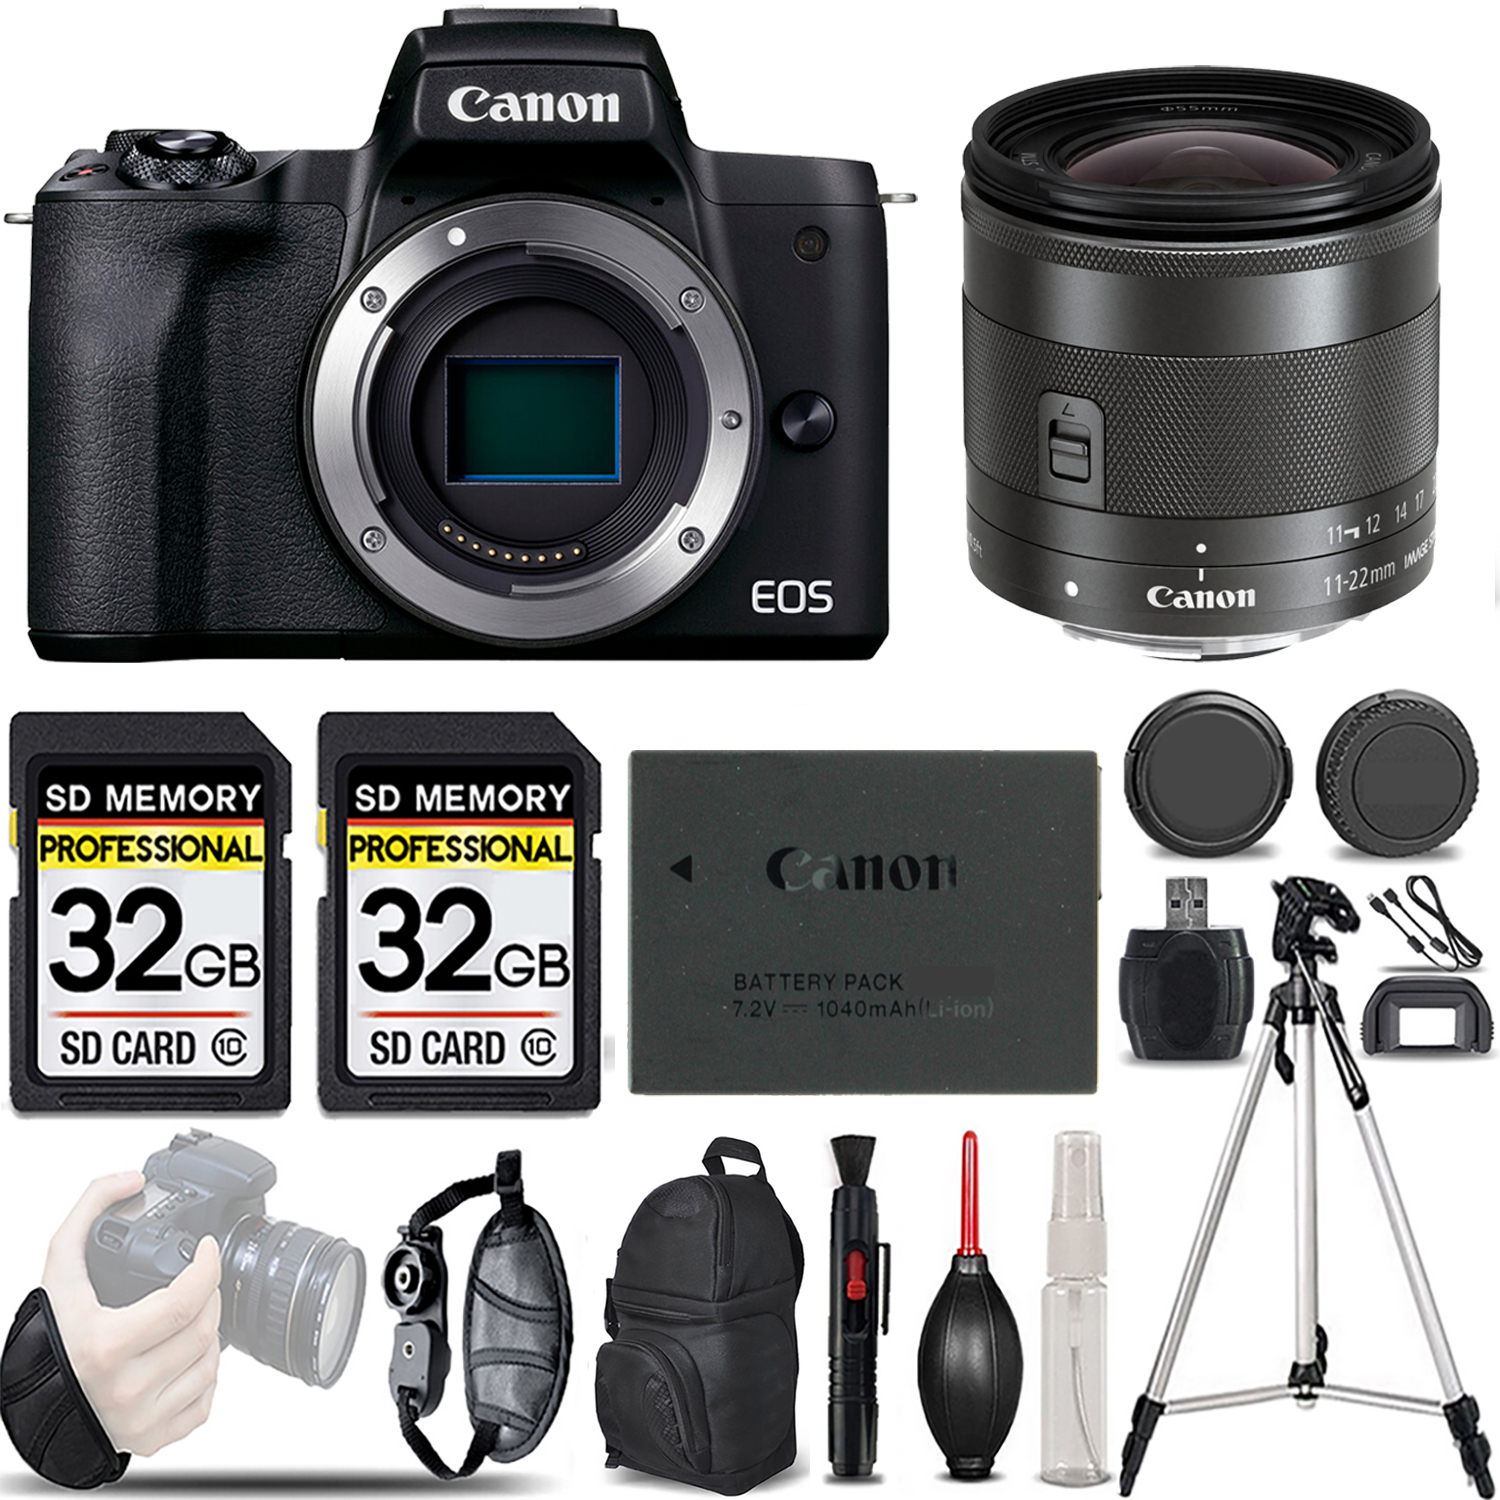 EOS M50 Mark II Camera (Black) +11-22mm f/4-5.6 IS STM Lens -LOADED KIT *FREE SHIPPING*